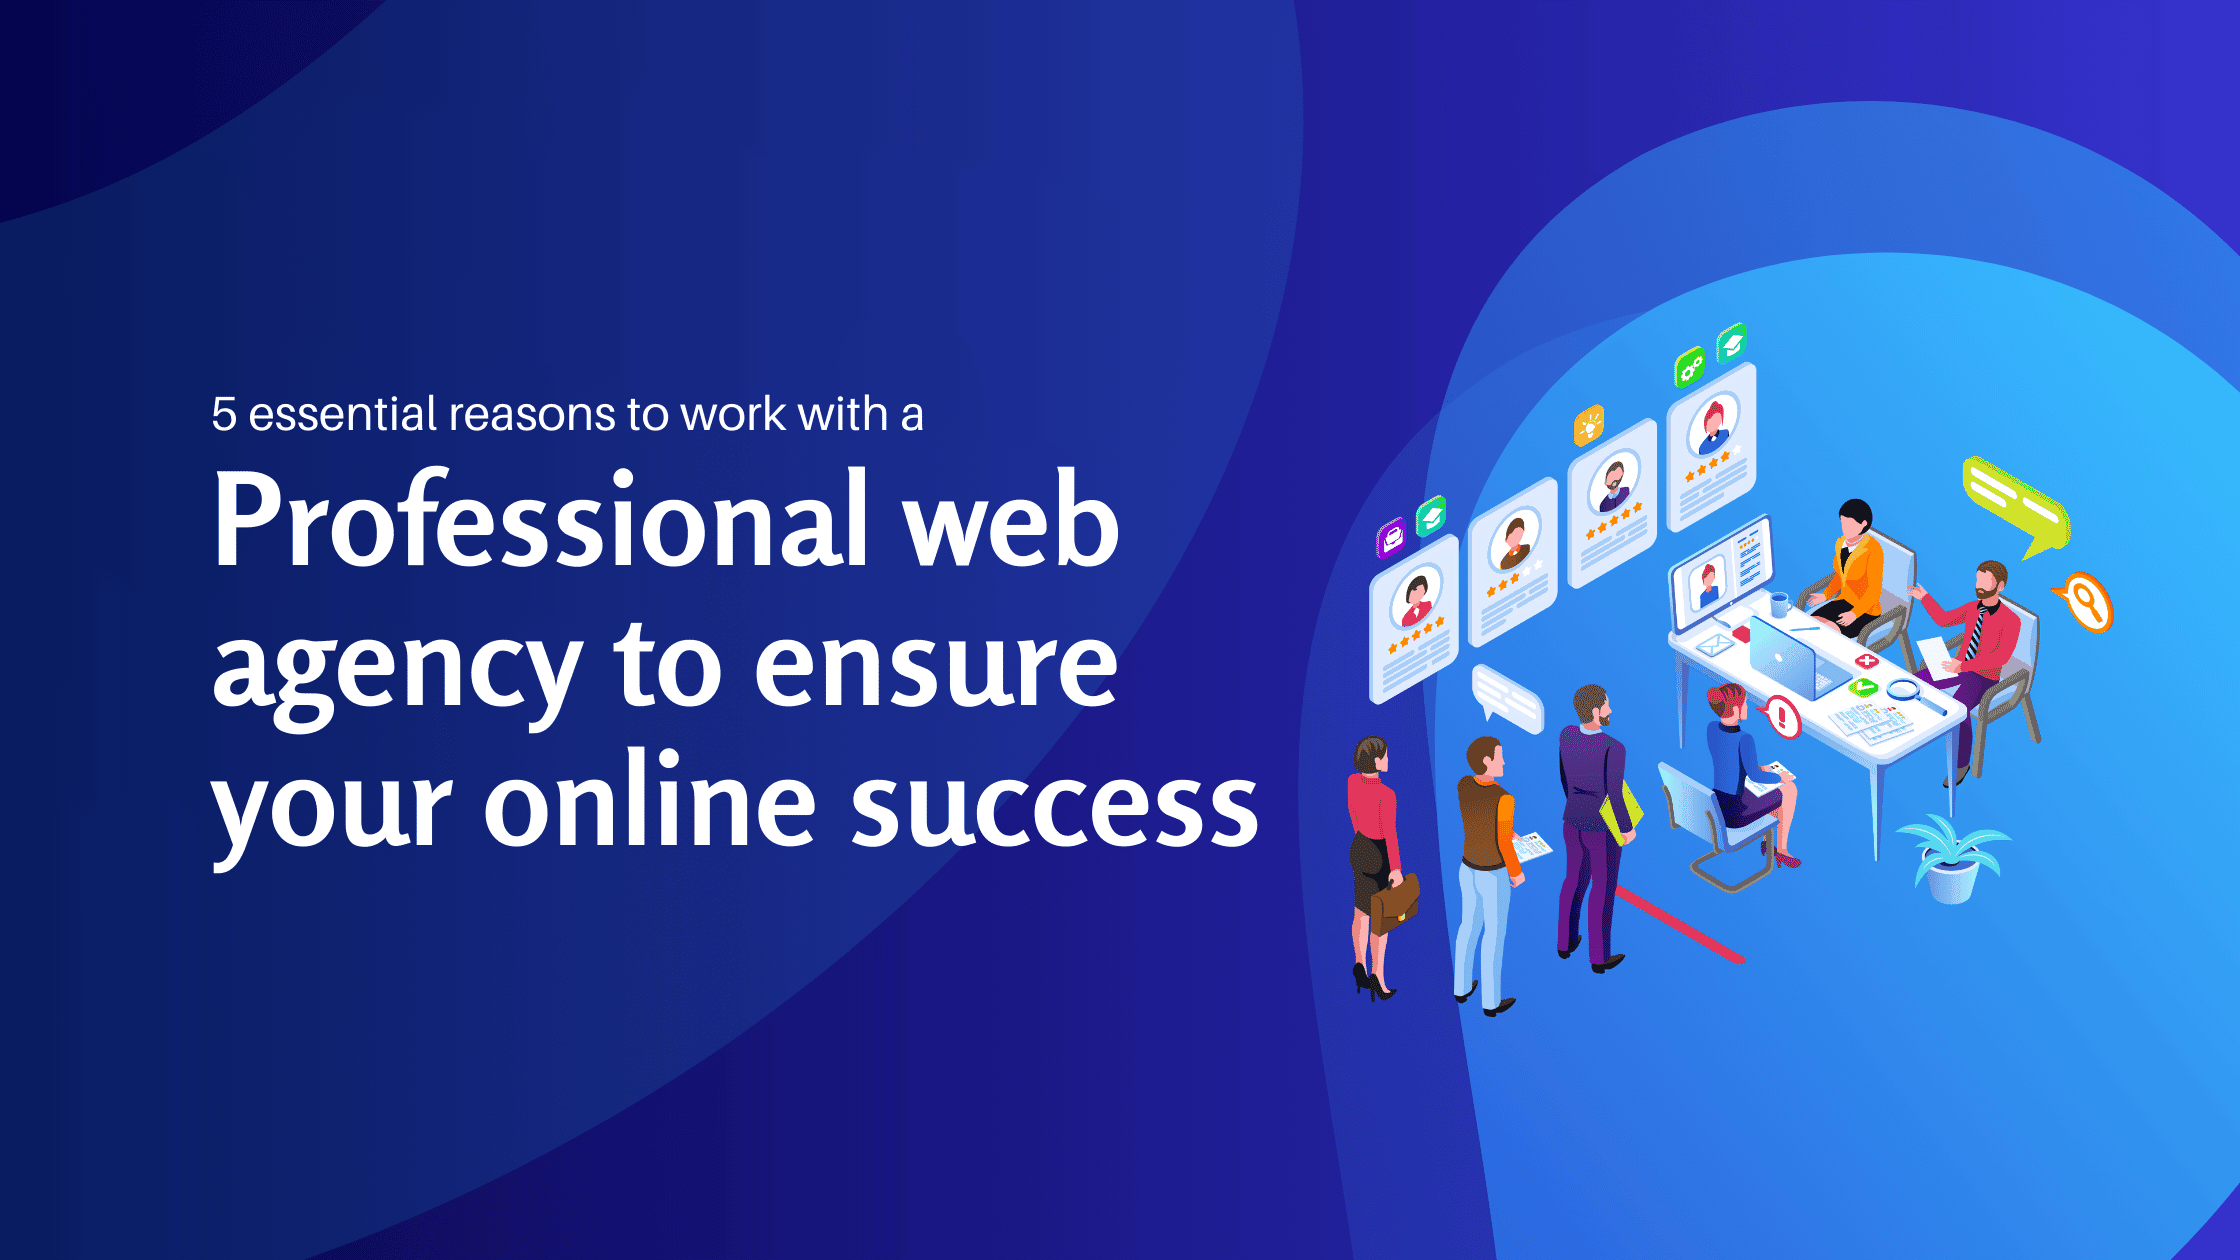 5 essential reasons to work with a professional web agency to ensure your online success - Konectiz